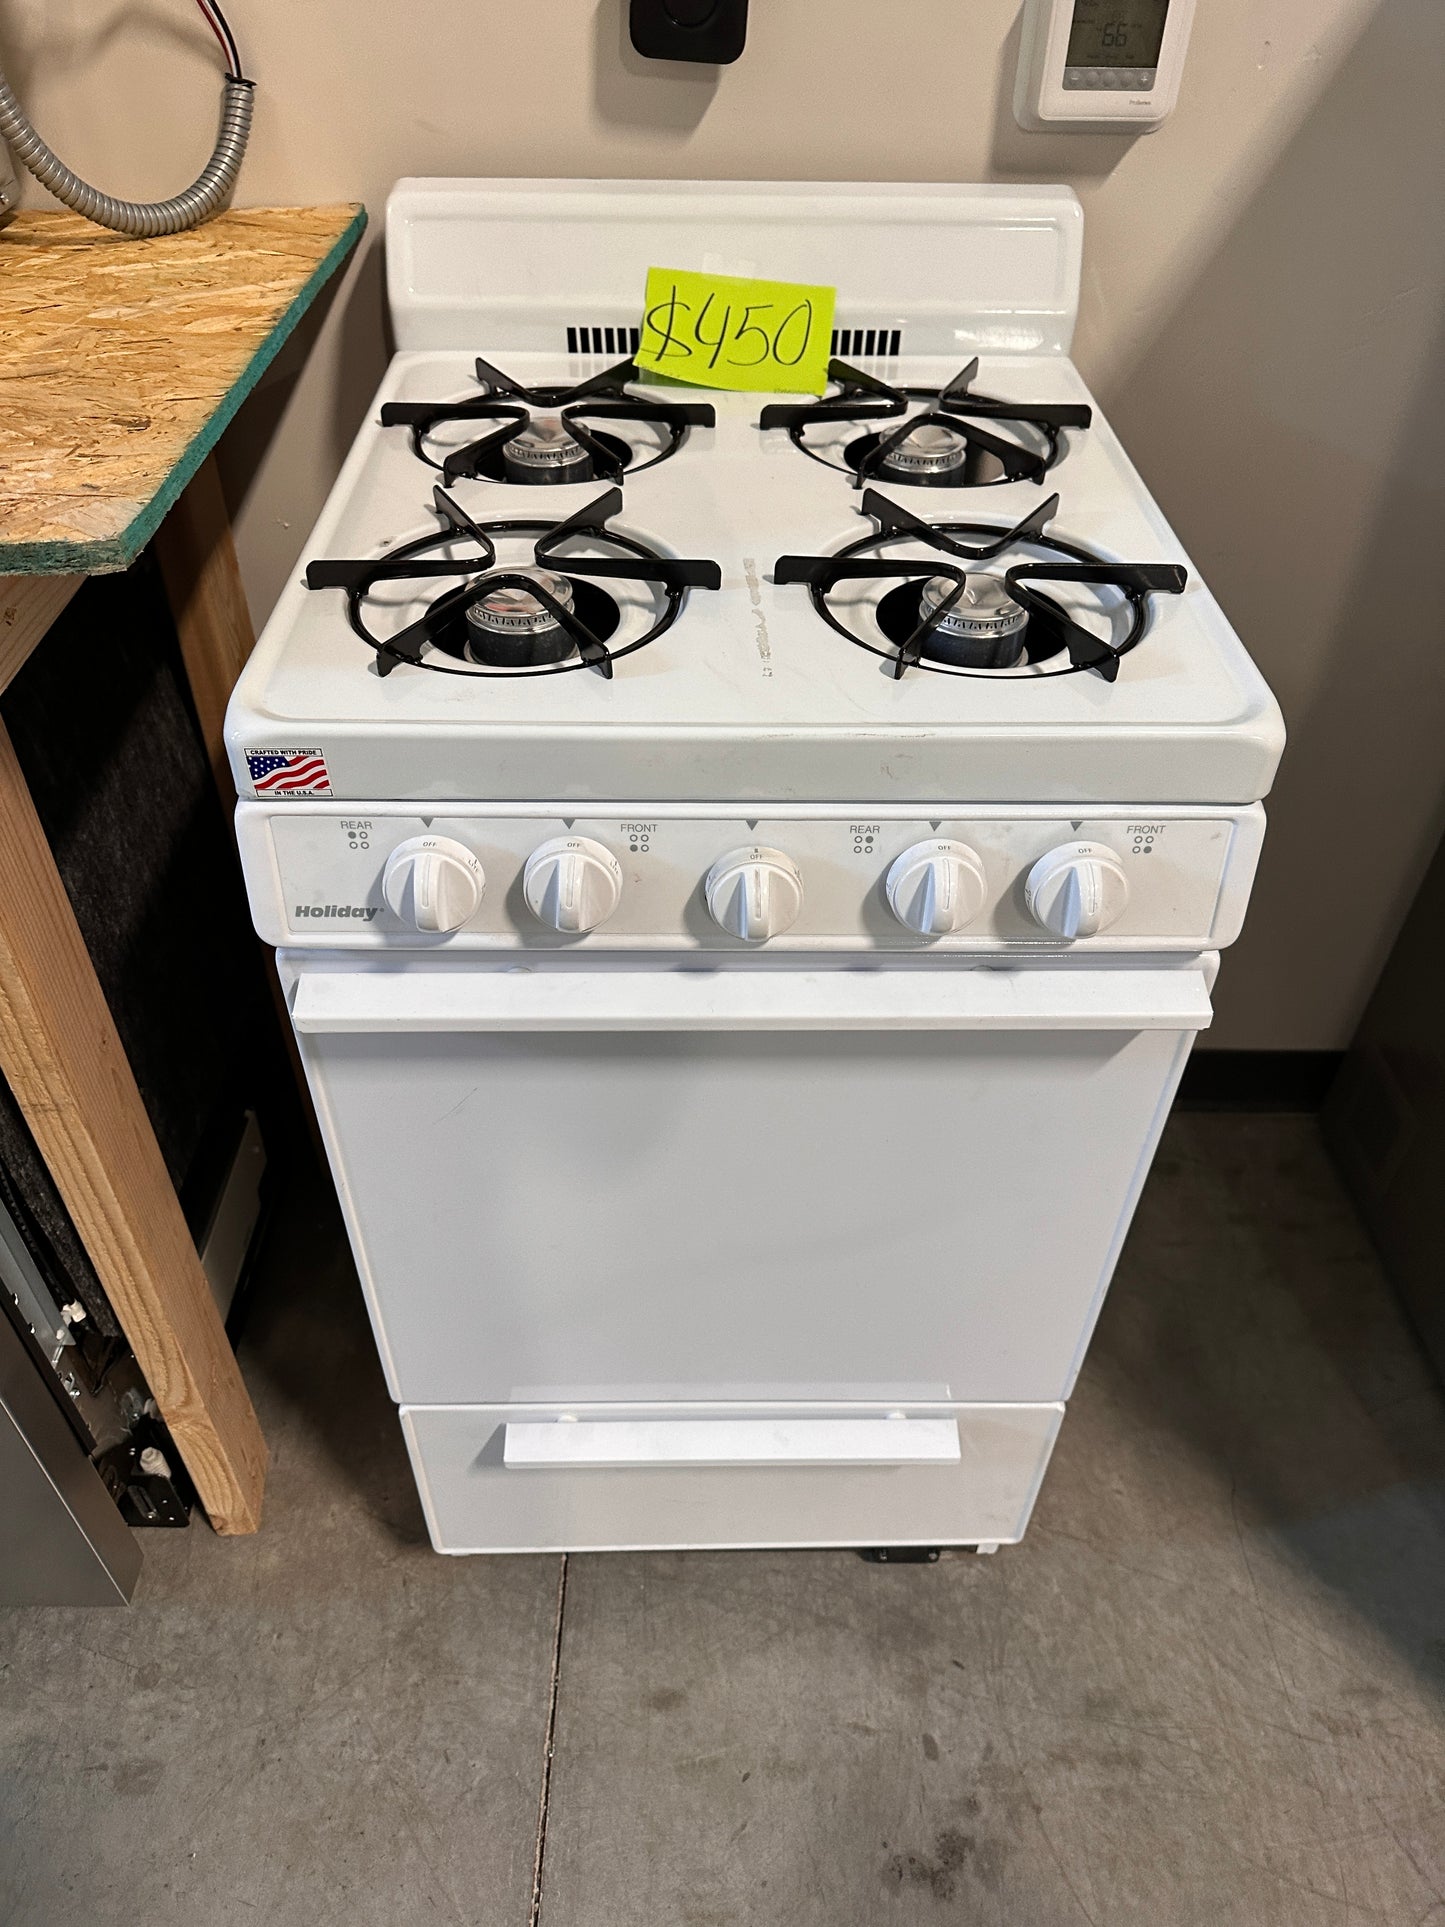 NEW SPARK IGNITION GAS RANGE - GREAT FOR SMALL SPACES - RAG11733